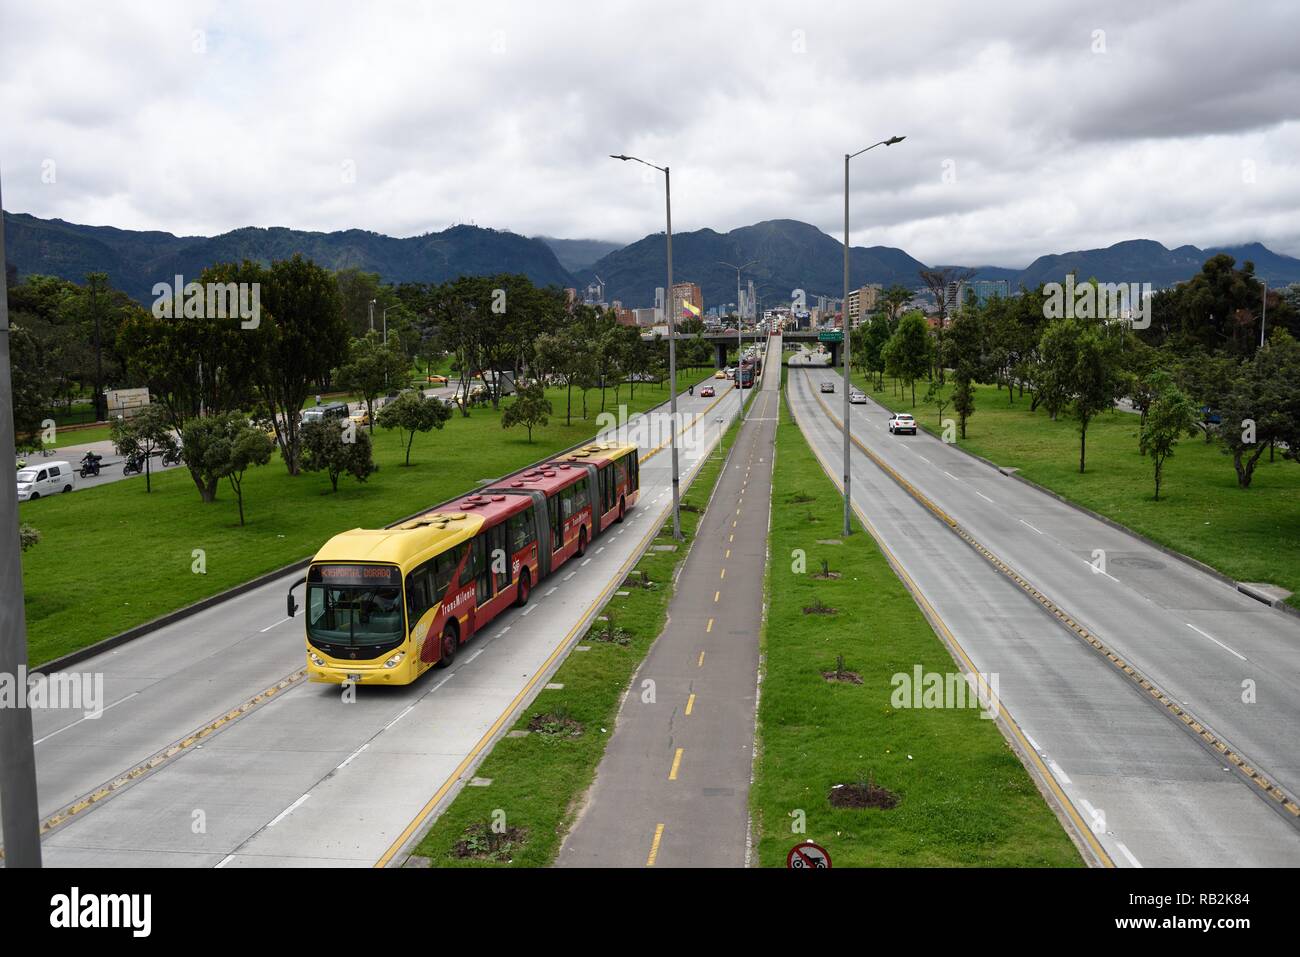 TransMilenio bus in transit, public mass transportation system, in the Andean mountain city of Bogota, Colombia, South America Stock Photo